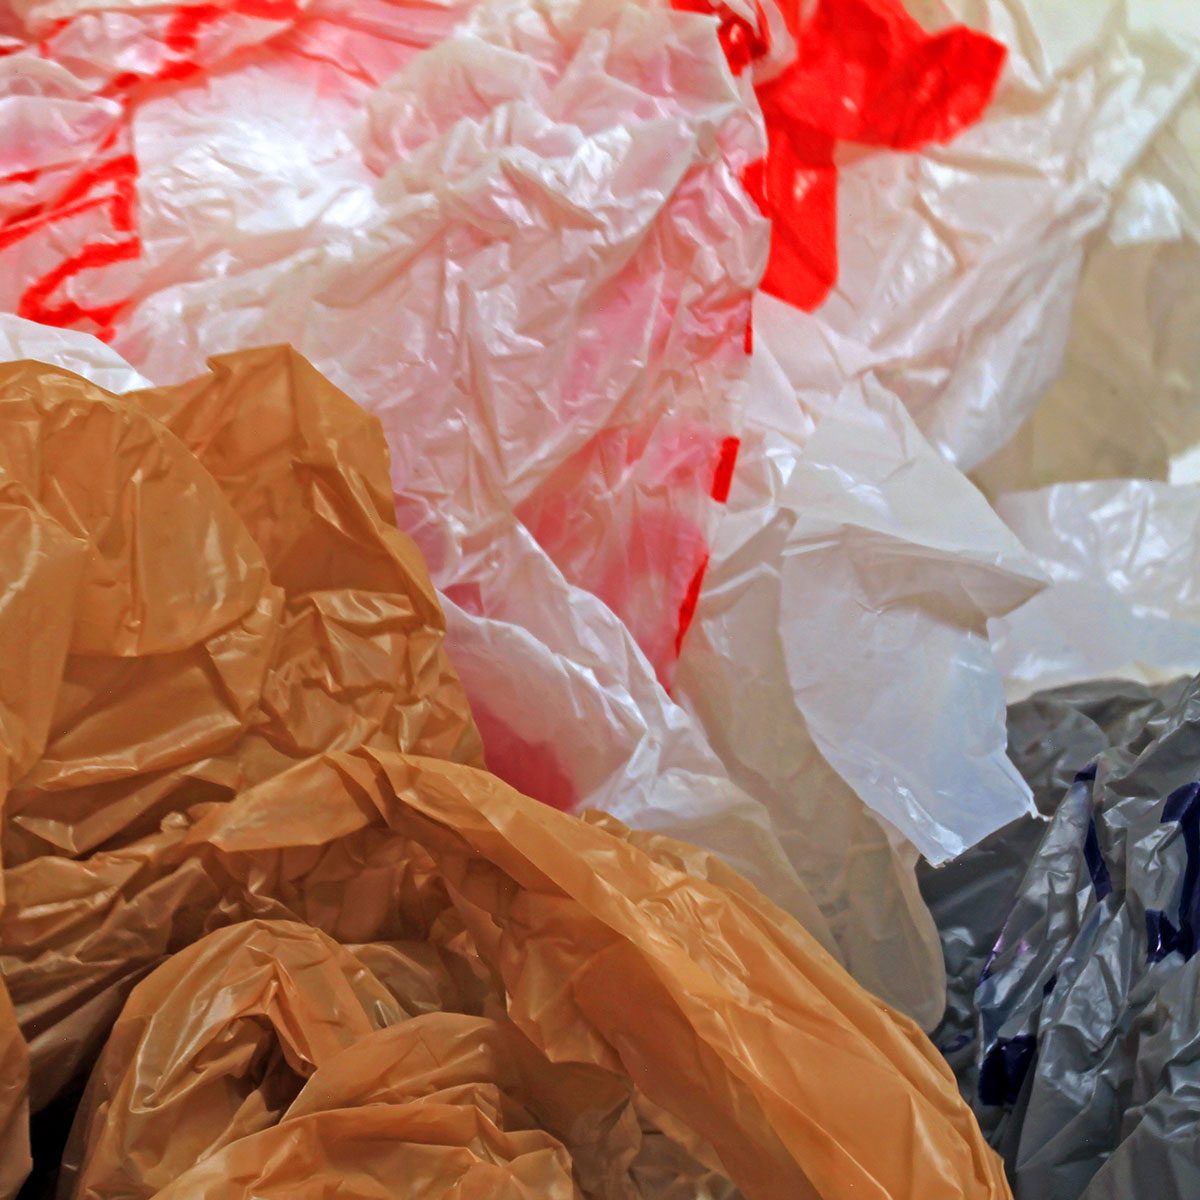 8 Ways to Organize and Store Plastic Bags